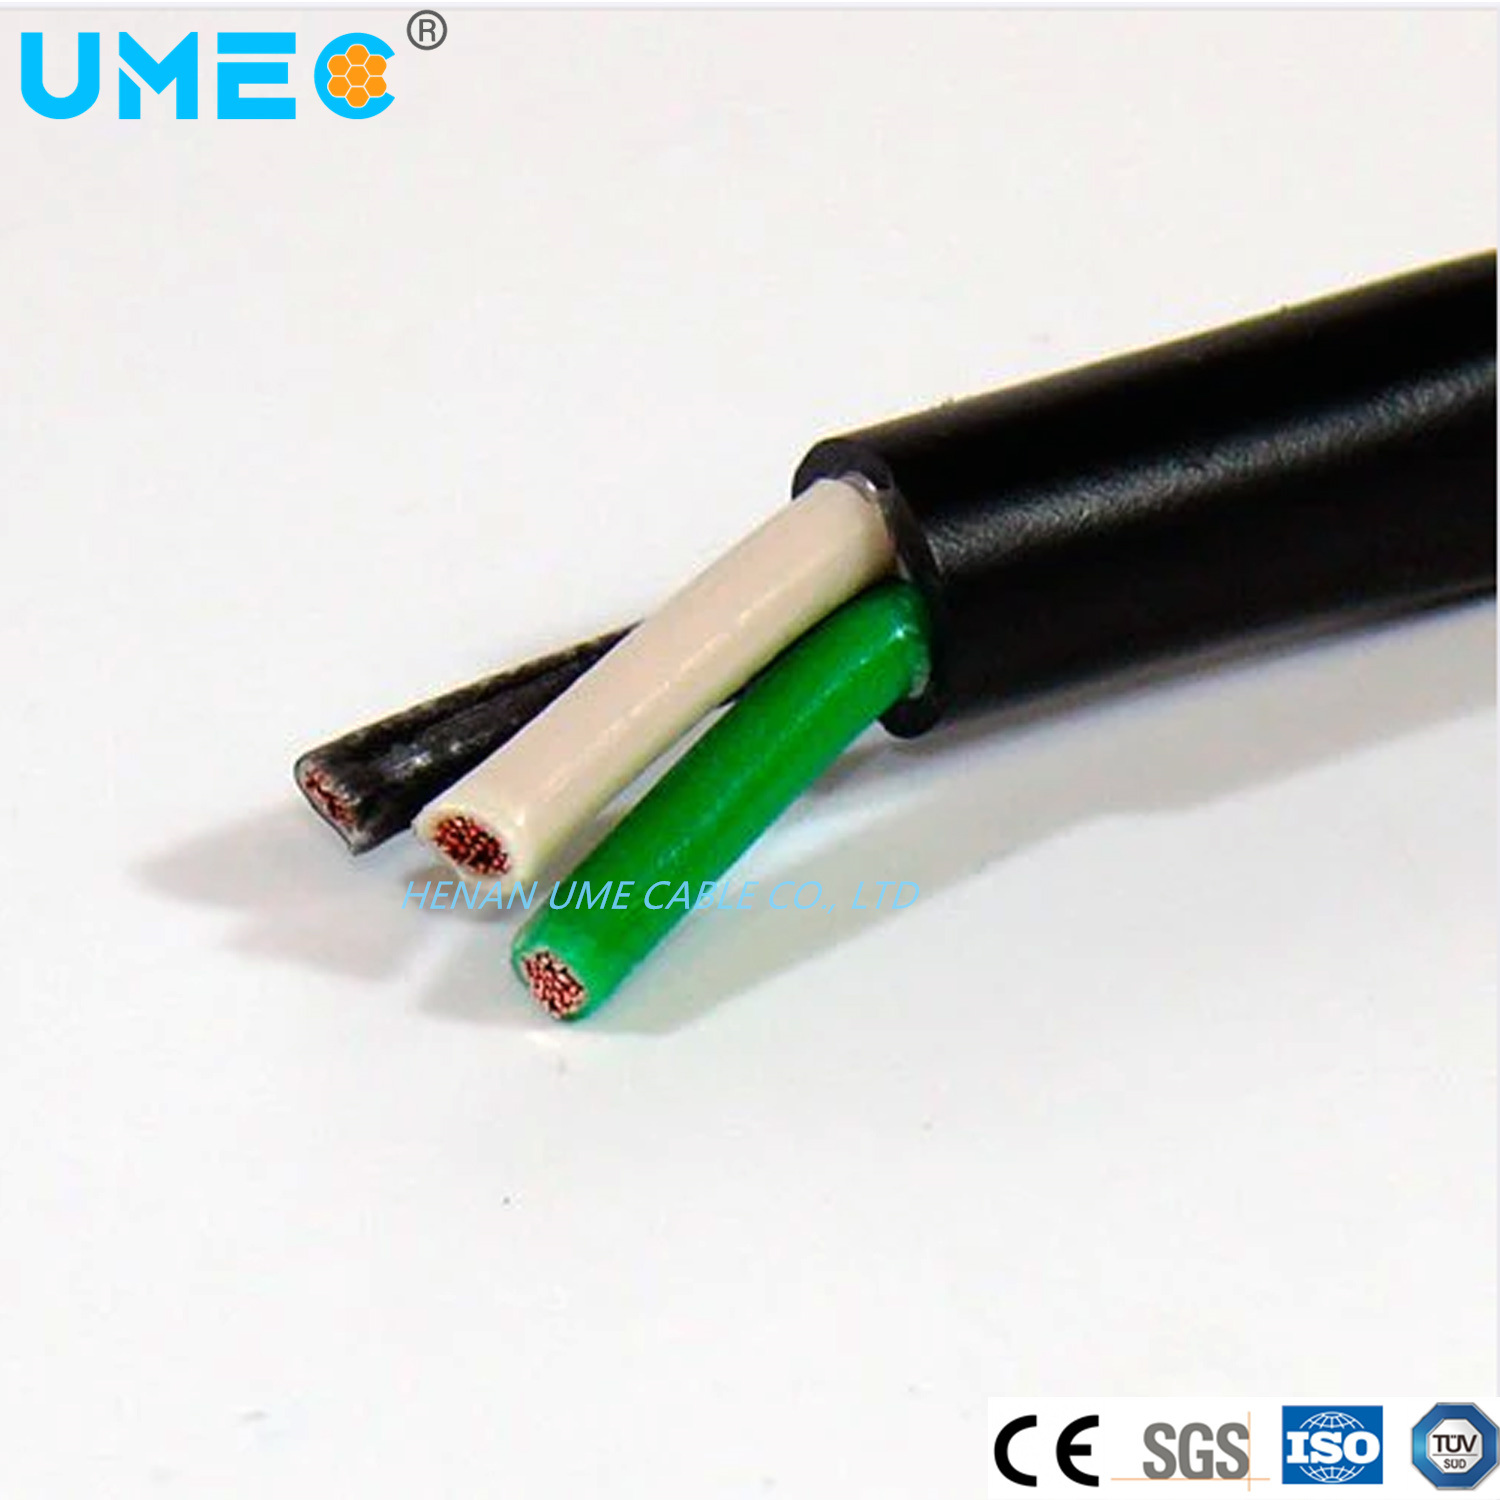 Hot Selling Flexible Copper Cable Nylon Cover Wire Cable 3corex10/12/14/16/18/20AWG Price